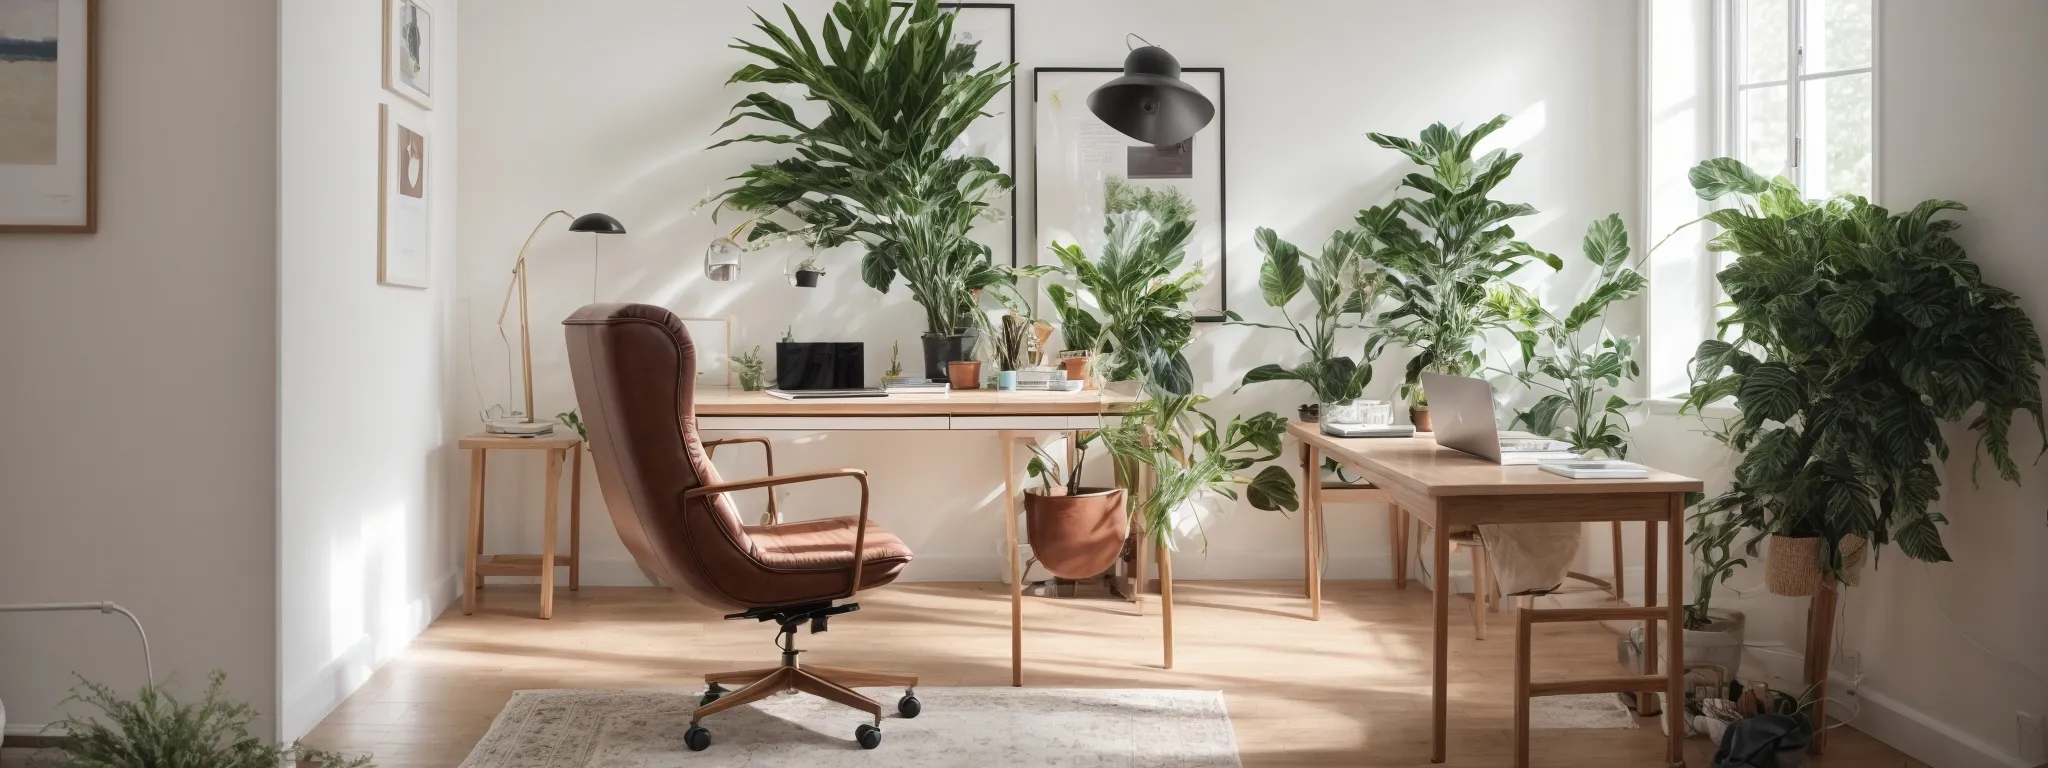 a serene home office with a minimalist desk, a comfortable chair, and a vibrant plant, bathed in natural light.